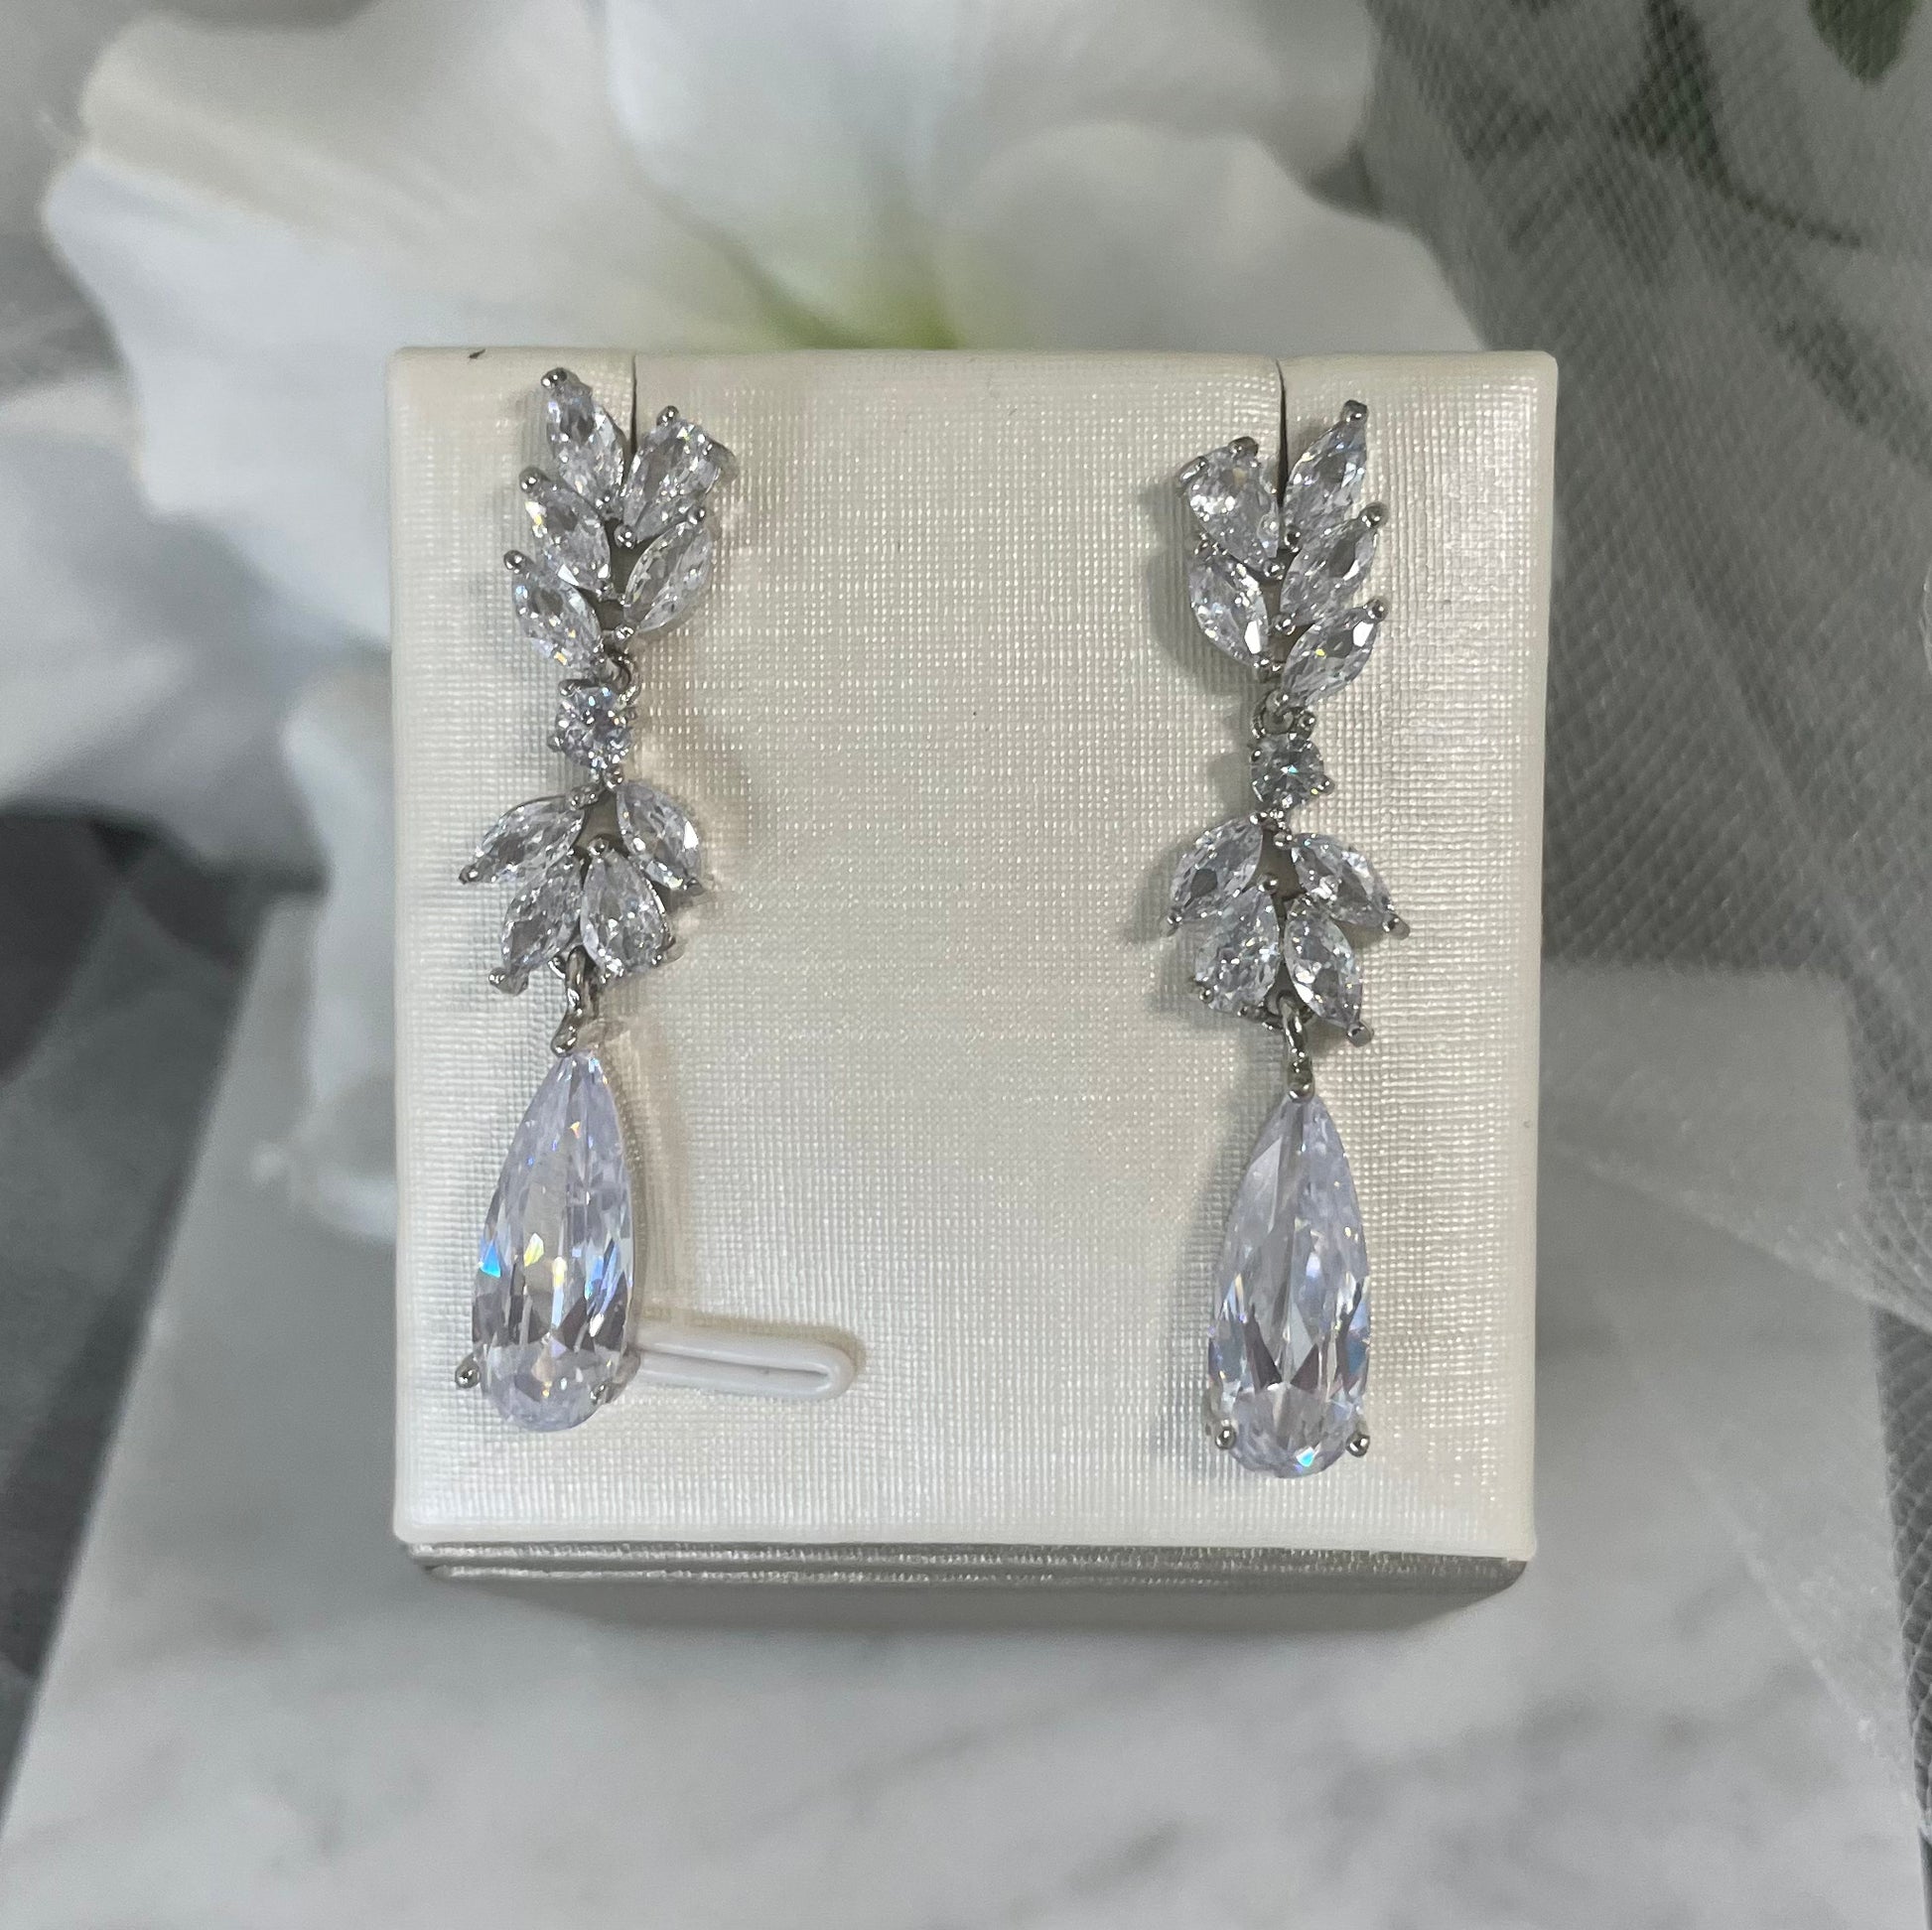 Elegant Irene crystal earrings featuring sparkling cubic zirconia in a classic dangle design, available at Divine Bridal in Macleod, Victoria.